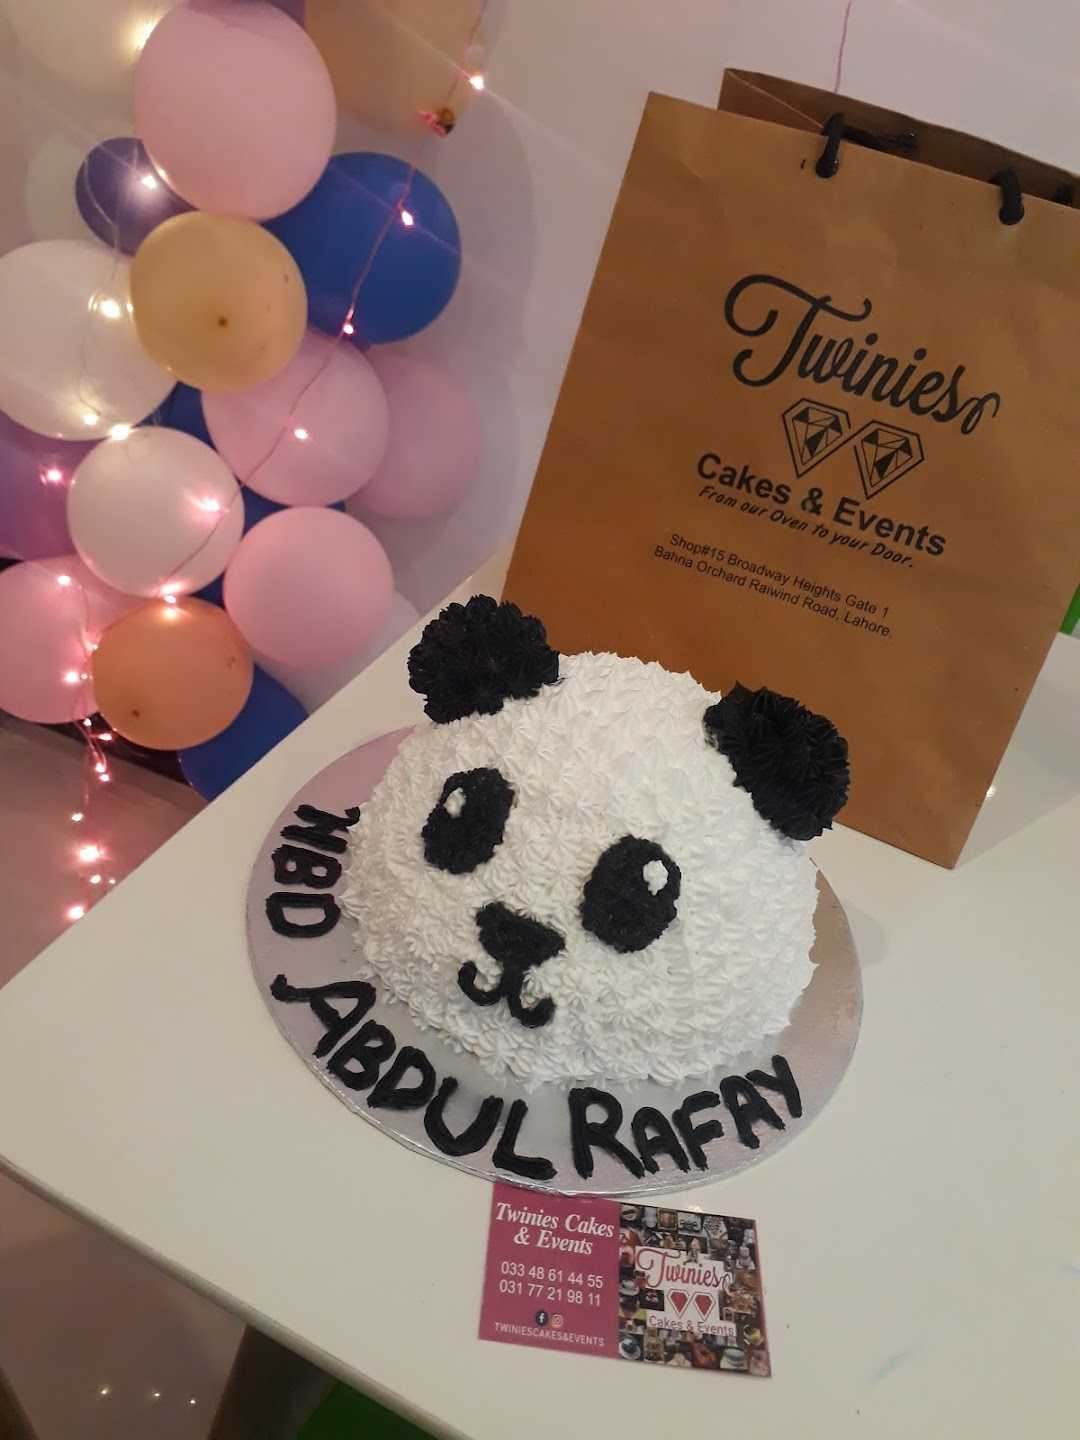 Twinies cakes and events